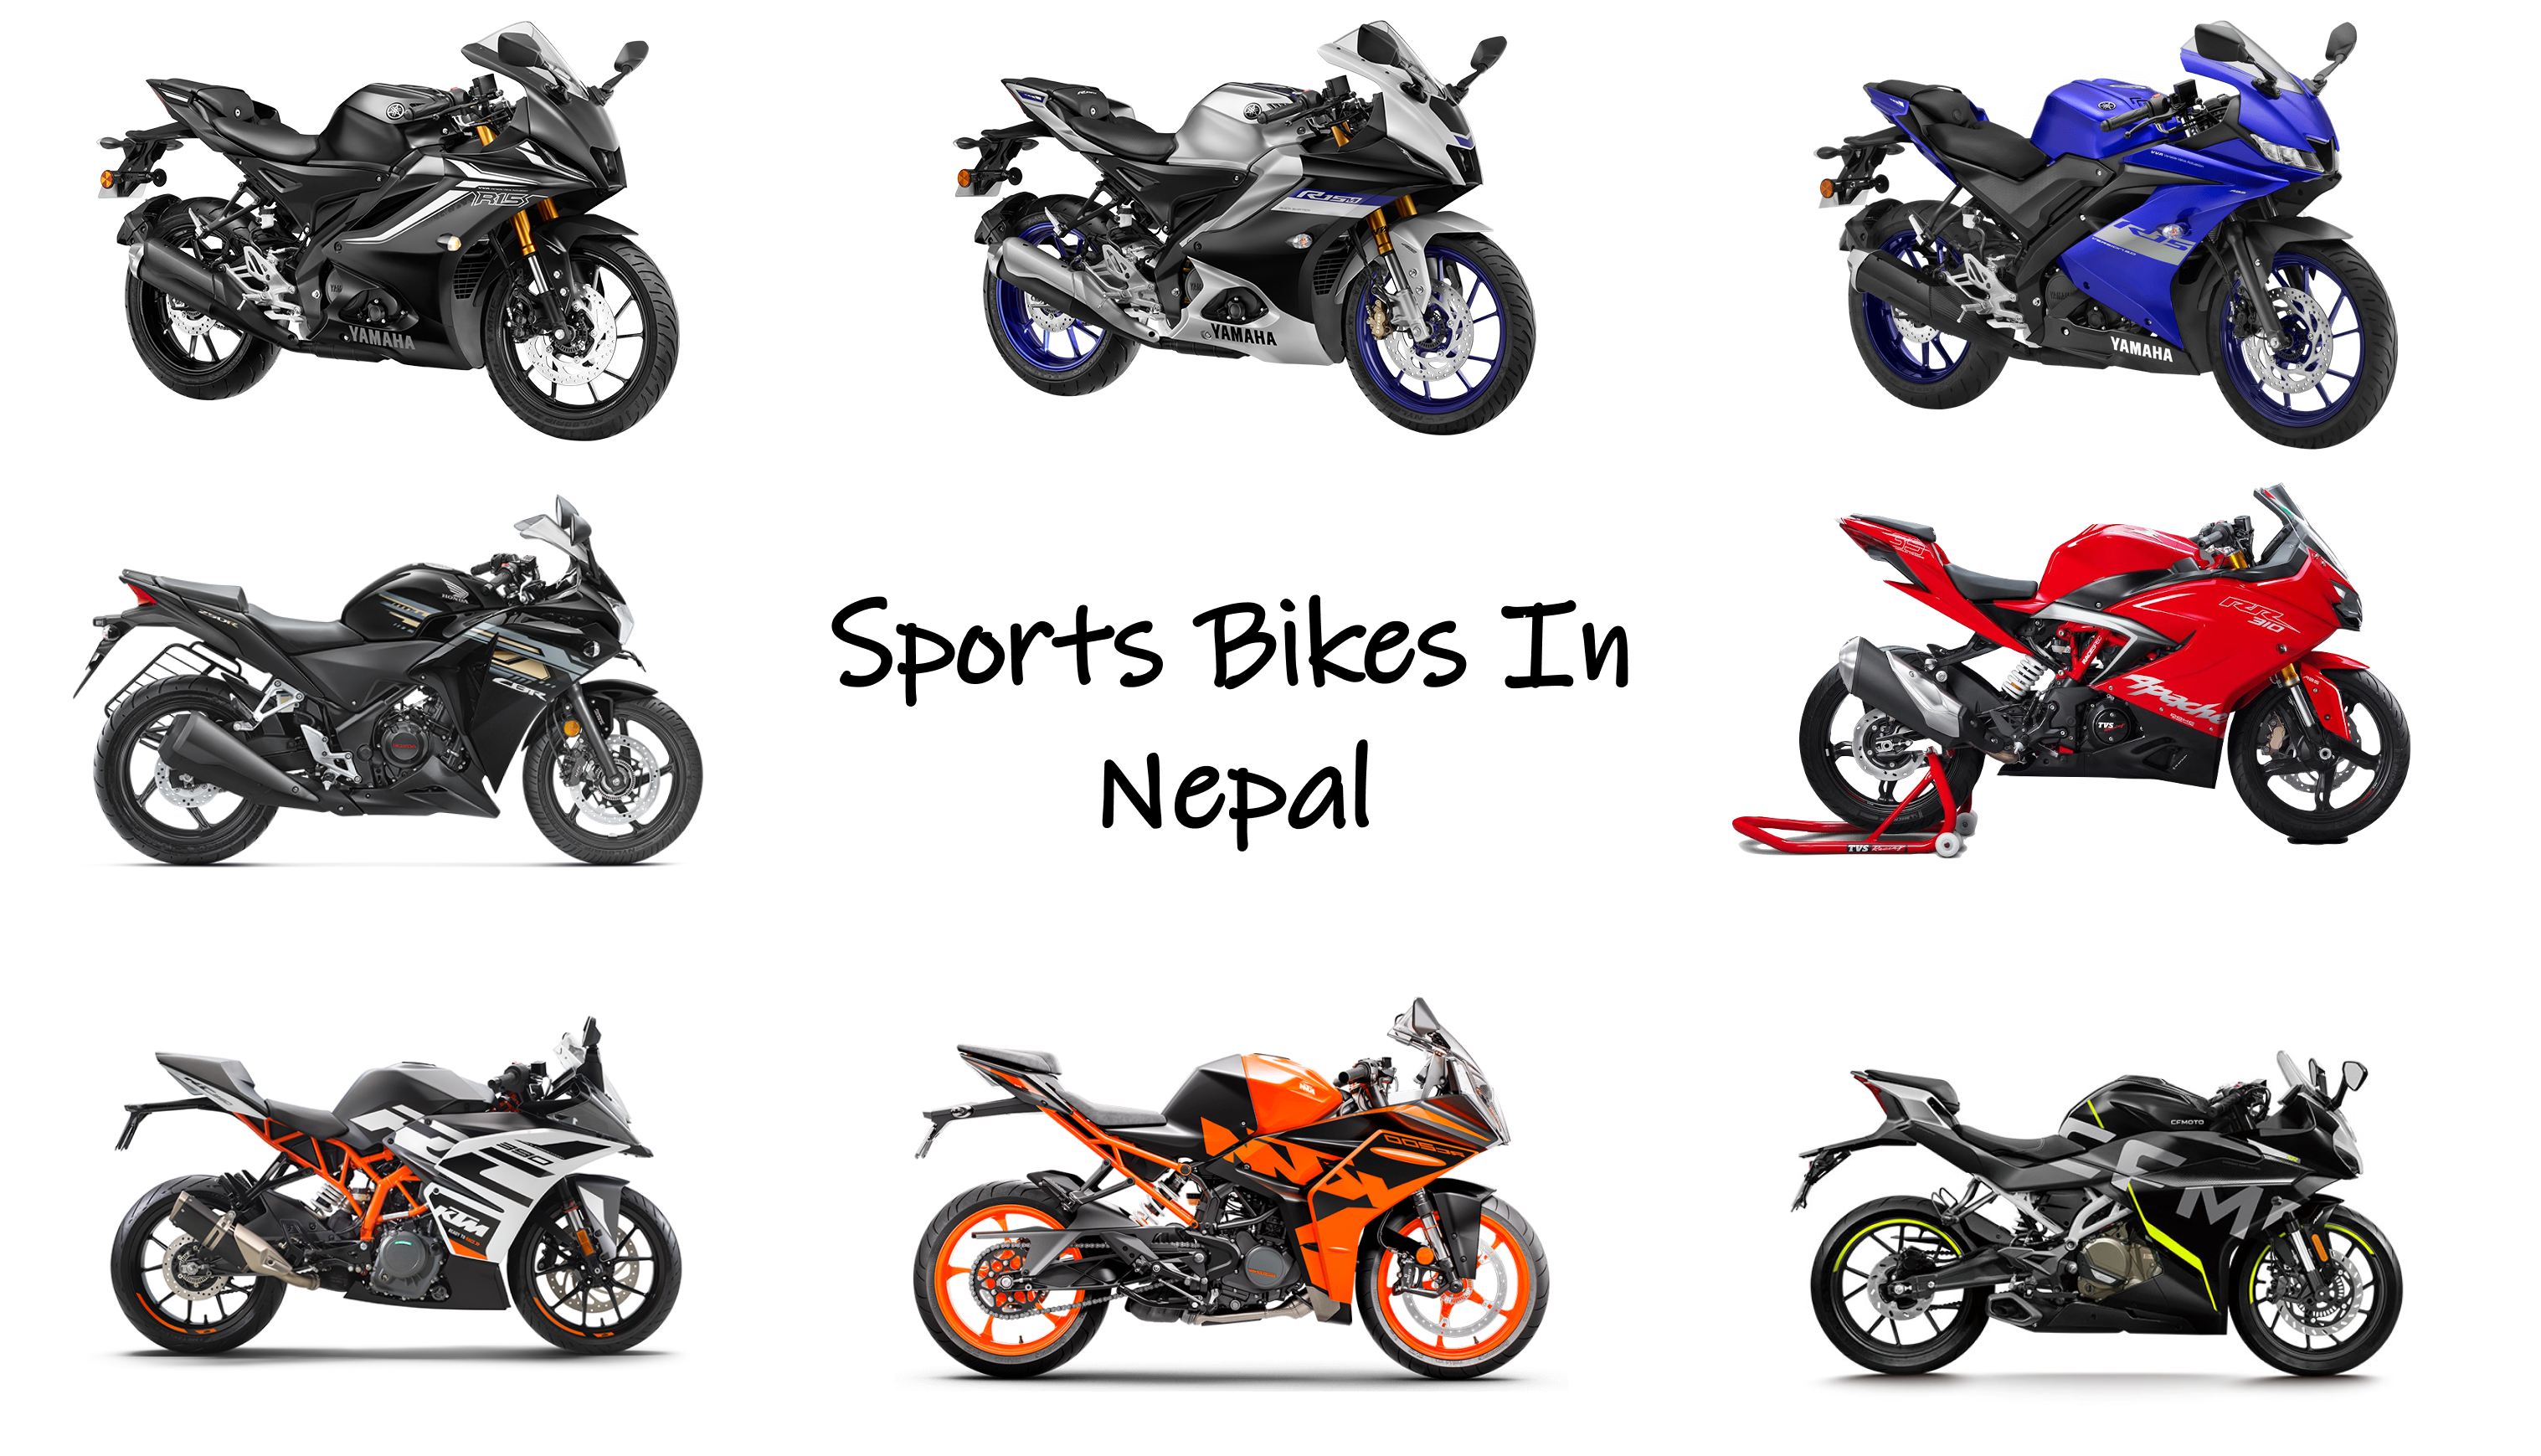 Price list: Top 8 sports bikes under Rs 1 million (10 lakhs) in Nepal 2023